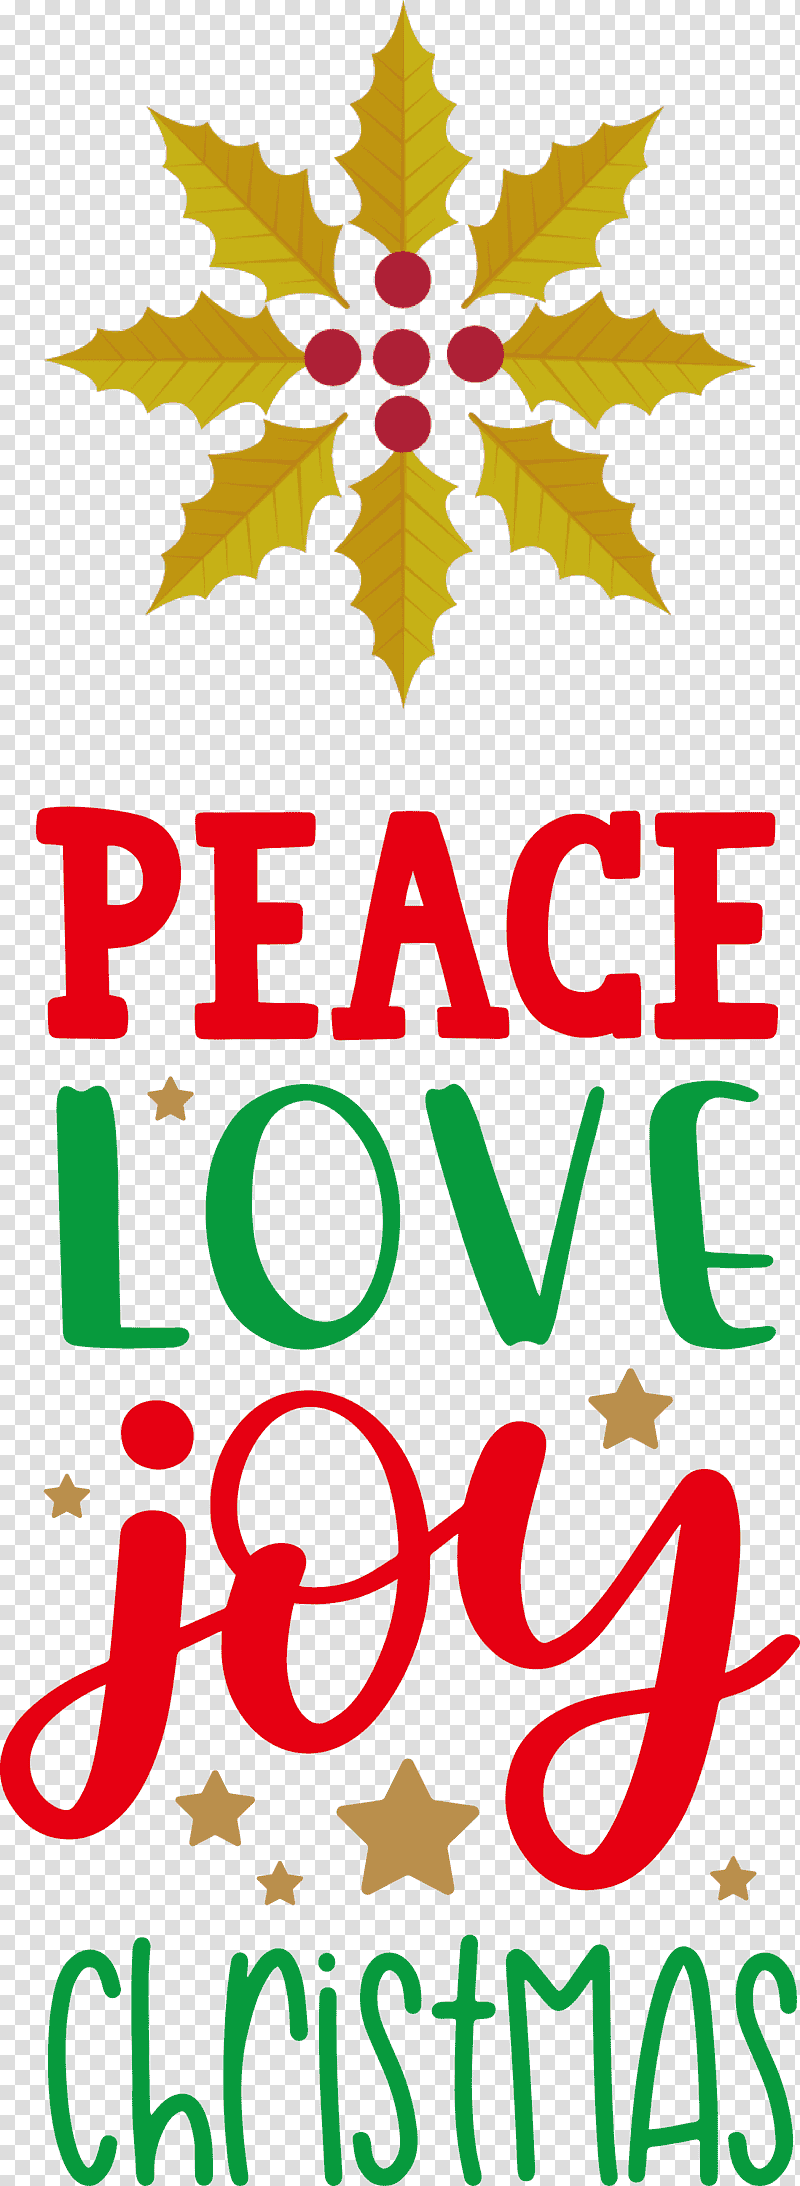 Peace Love Joy, Christmas , Christmas Tree, Christmas Day, Floral Design, Leaf, Christmas Ornament M transparent background PNG clipart